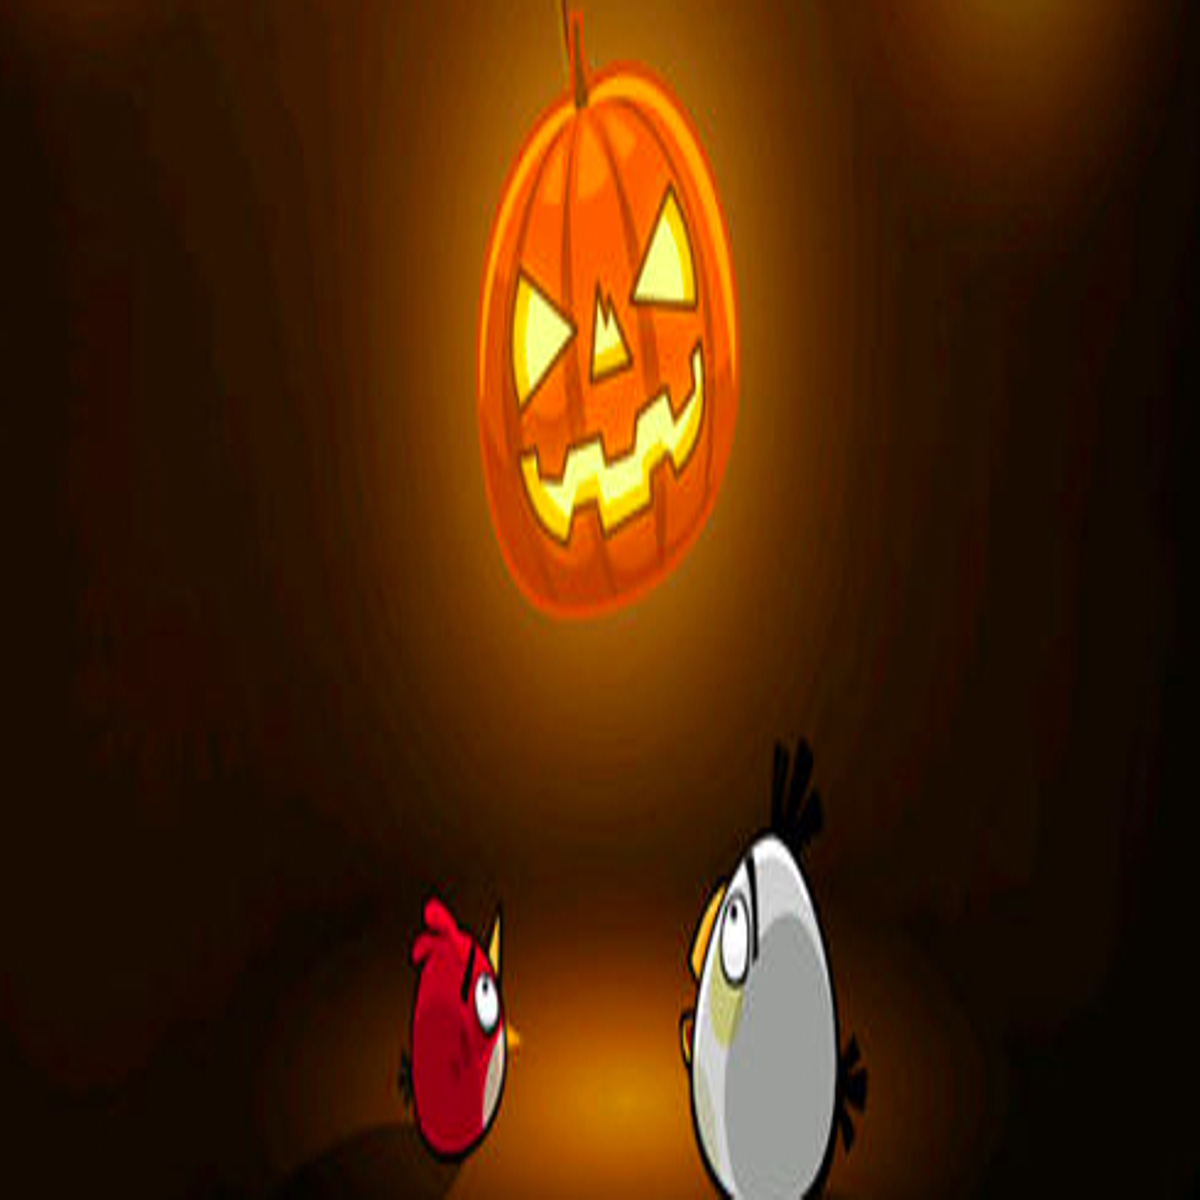 angry birds seasons trick or treat